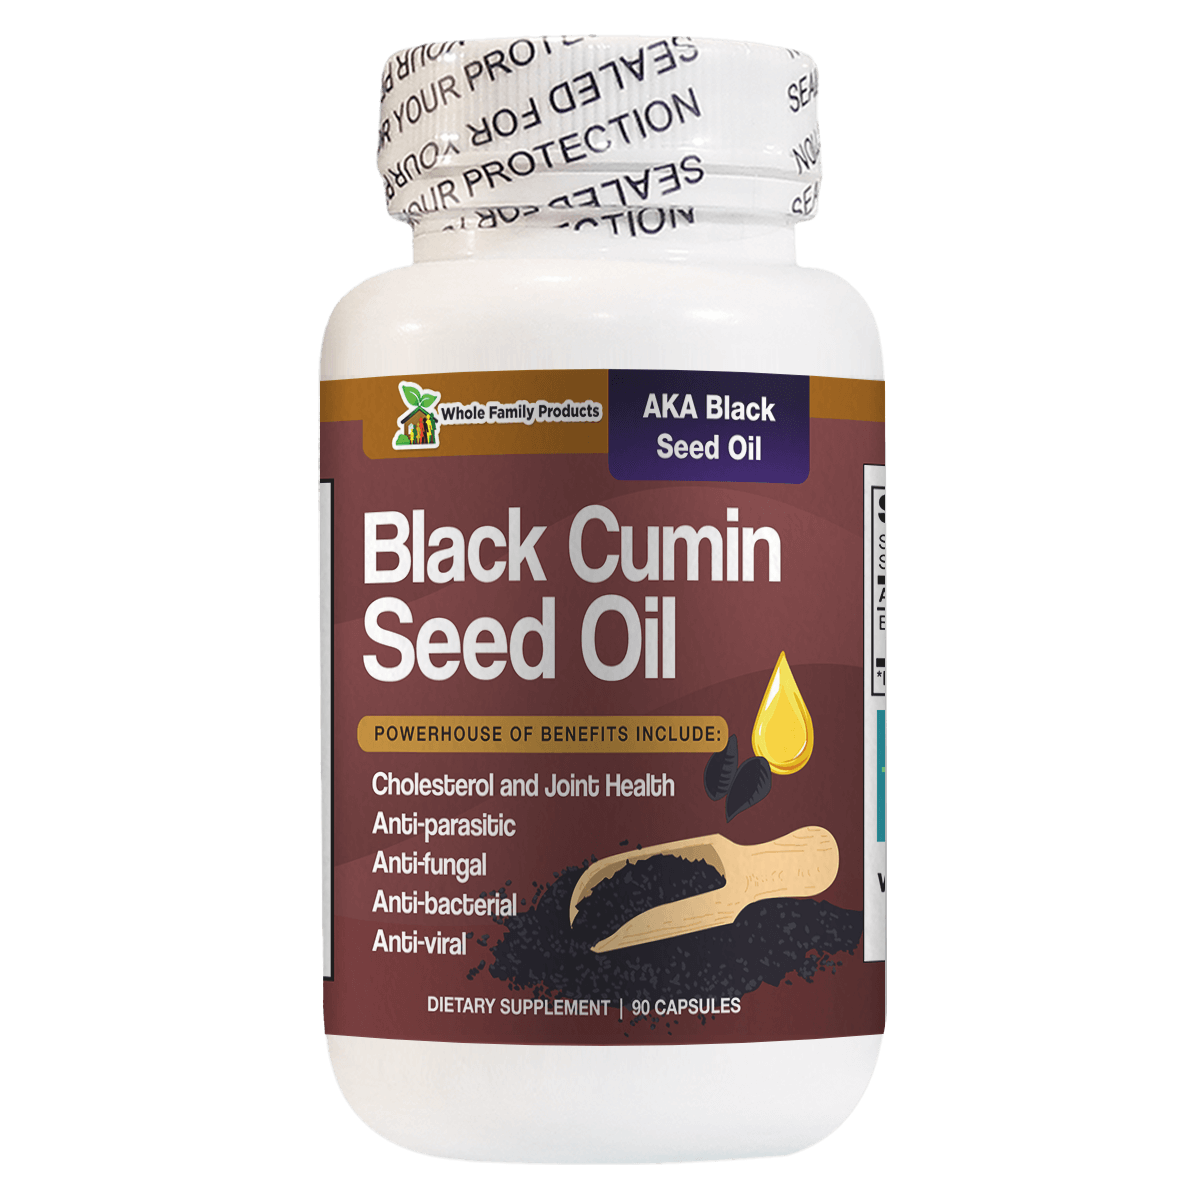 Black Cumin Seed Oil 90 Capsules Helps Cholesterol and Joint Health